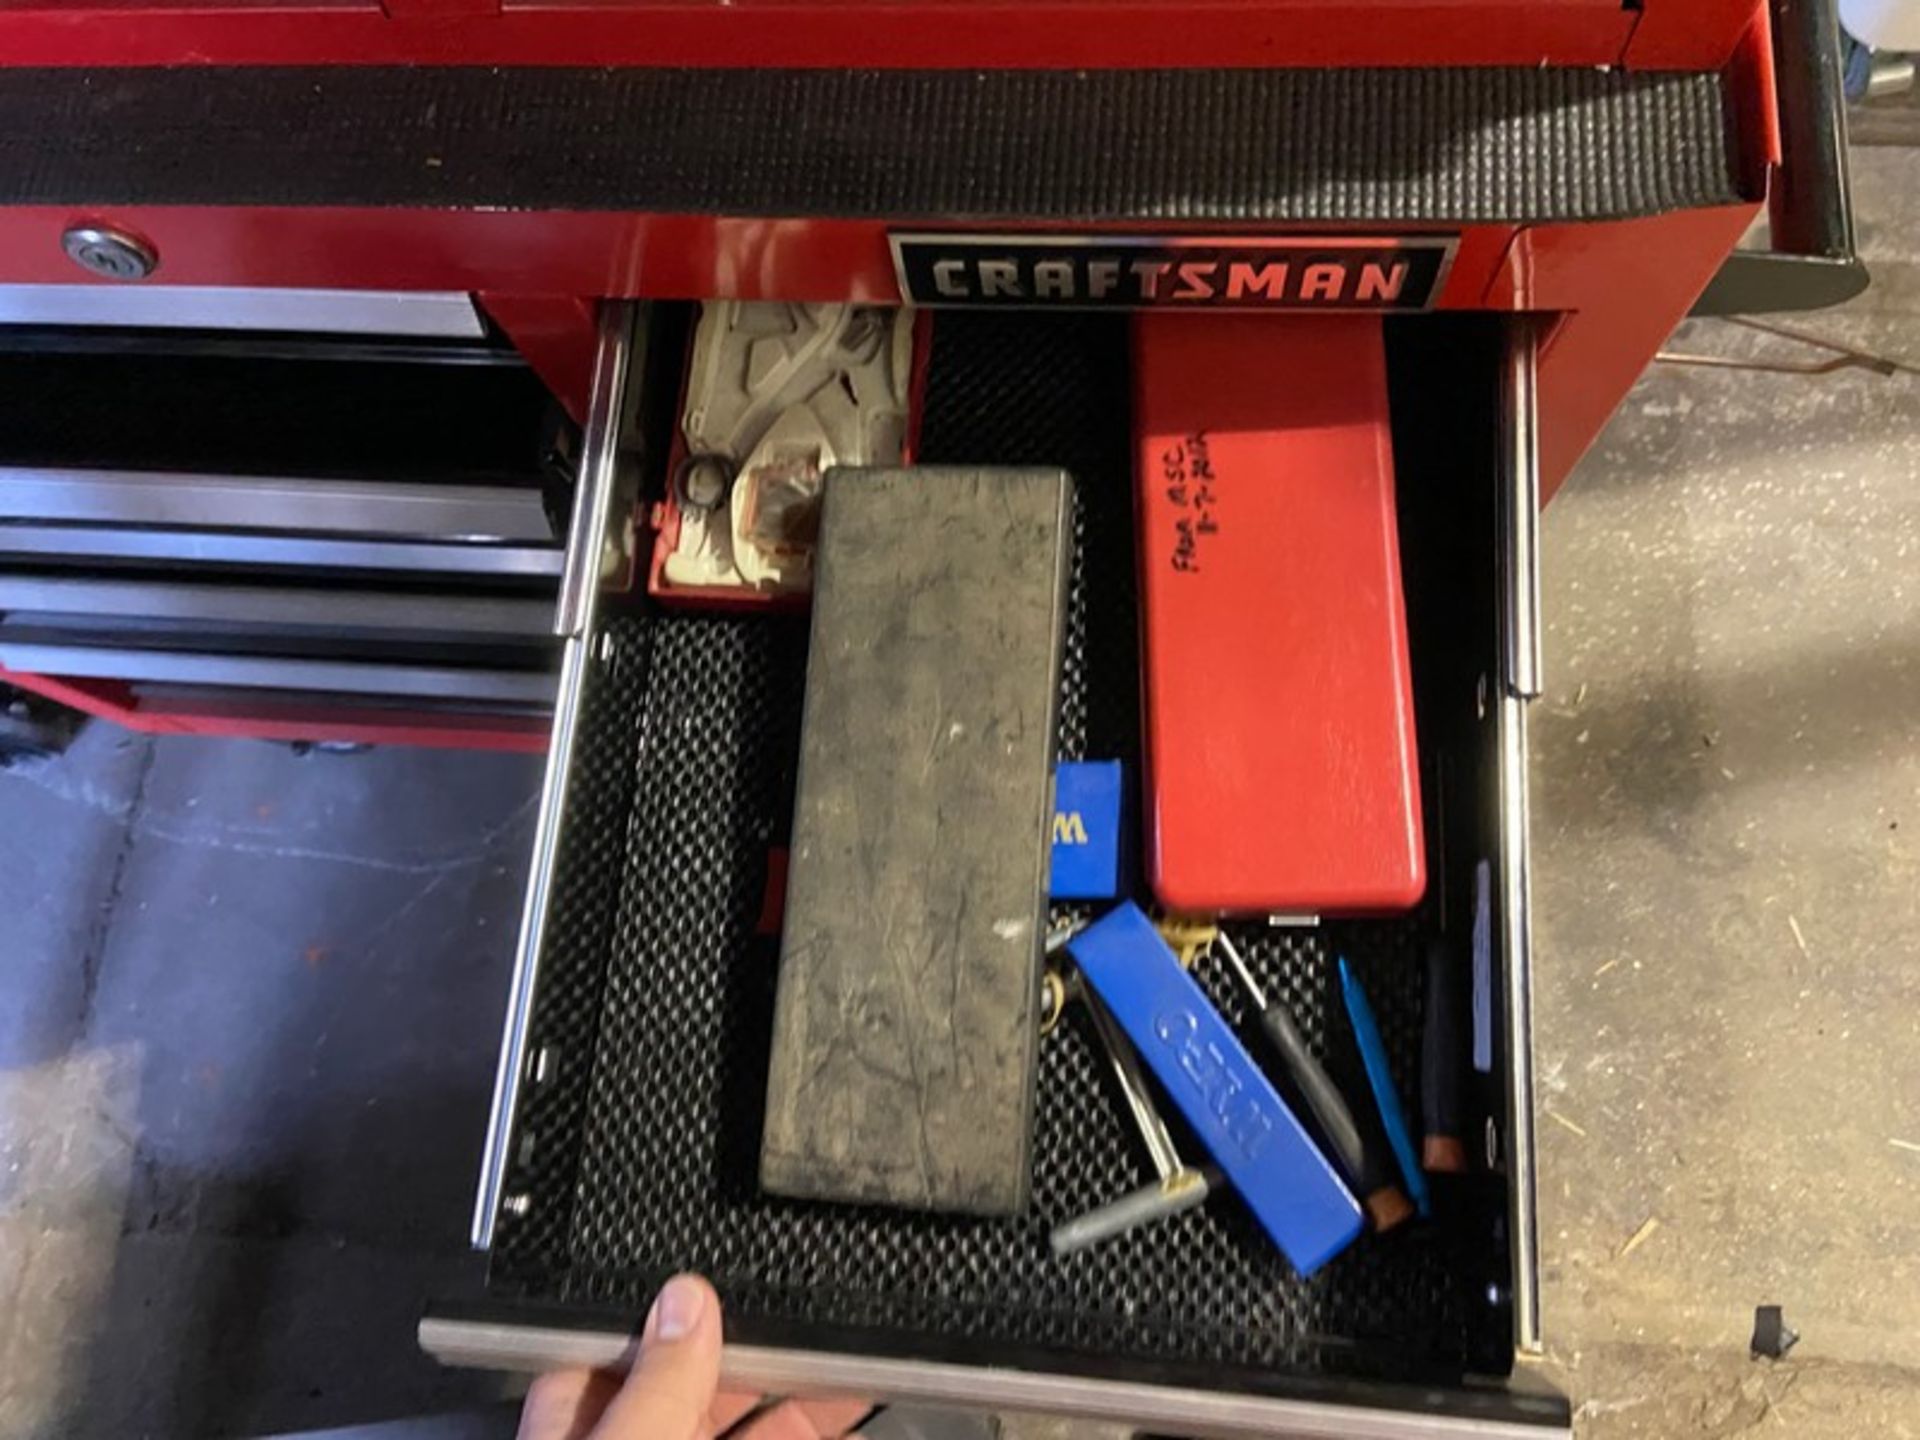 CRAFTSMAN PORTABLE TOOLBOX WITH CONTENTS, INCLUES MONKEY WRENCHES, WRENCHES, SCREW DRIVERS, & OTHER - Image 12 of 15